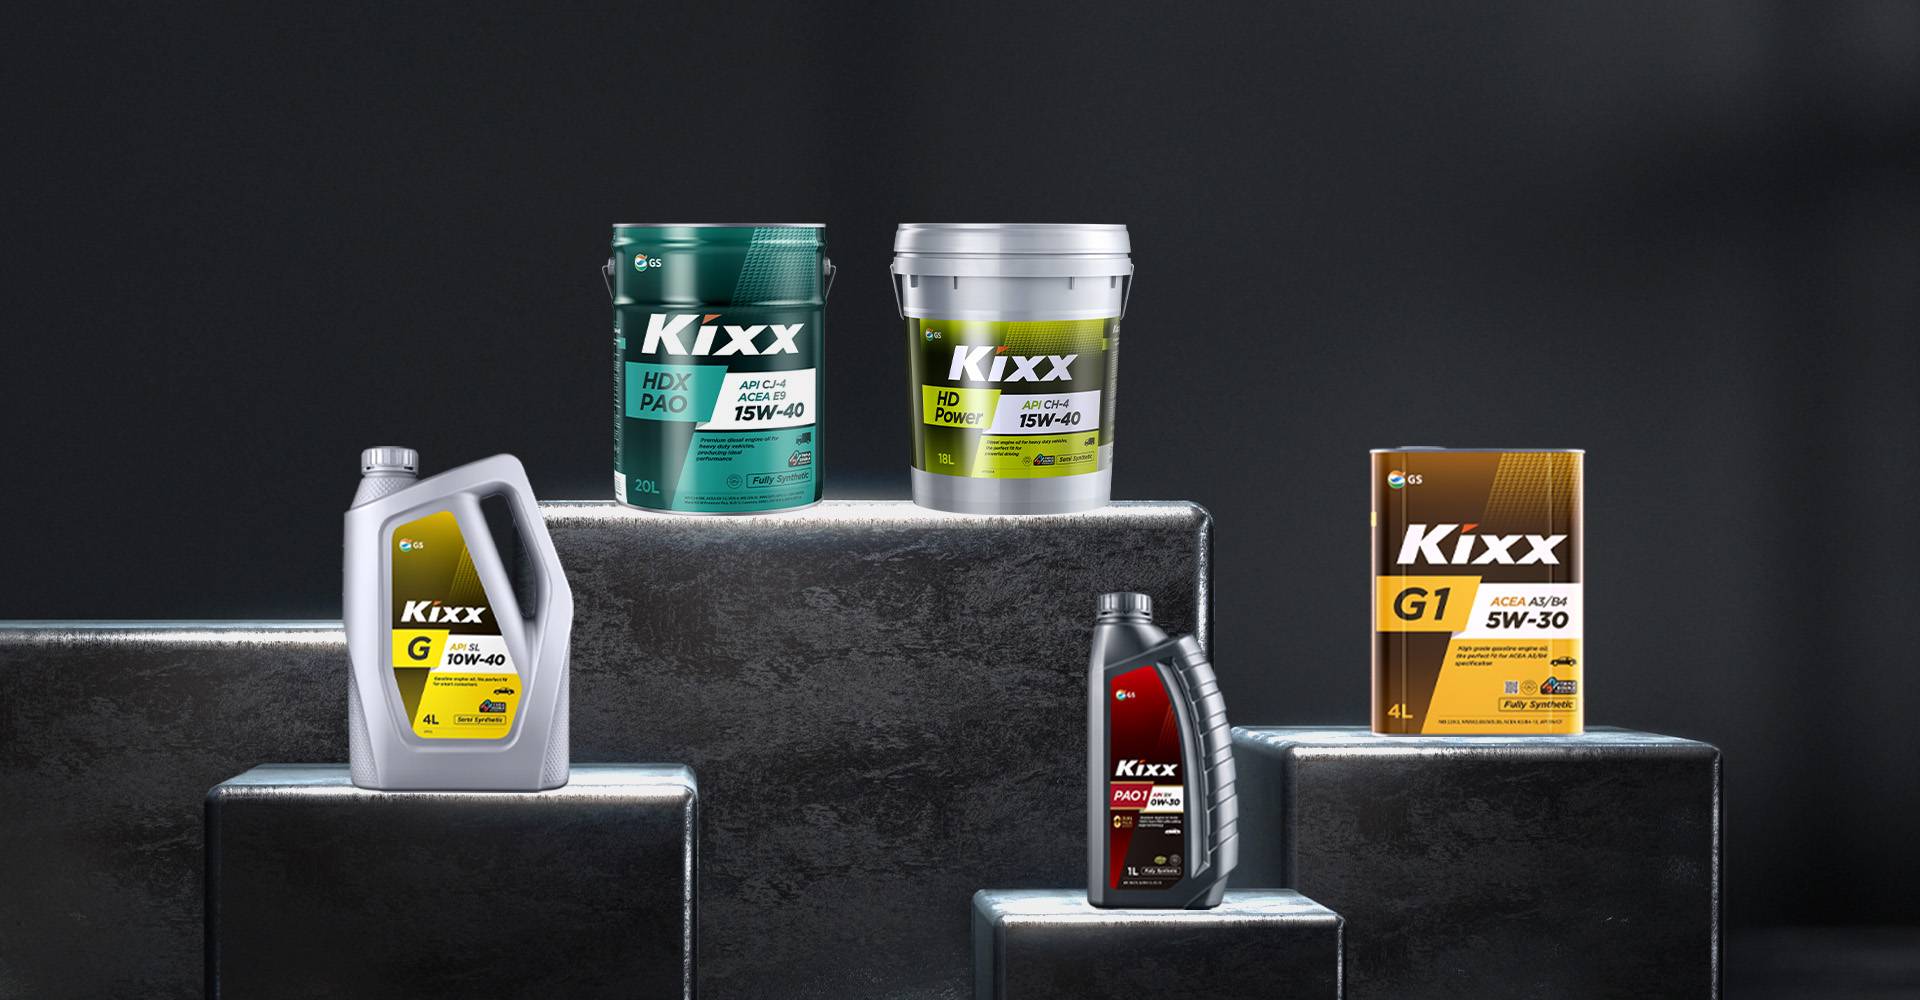  Kixx Oil | How to Properly Store Engine Oil